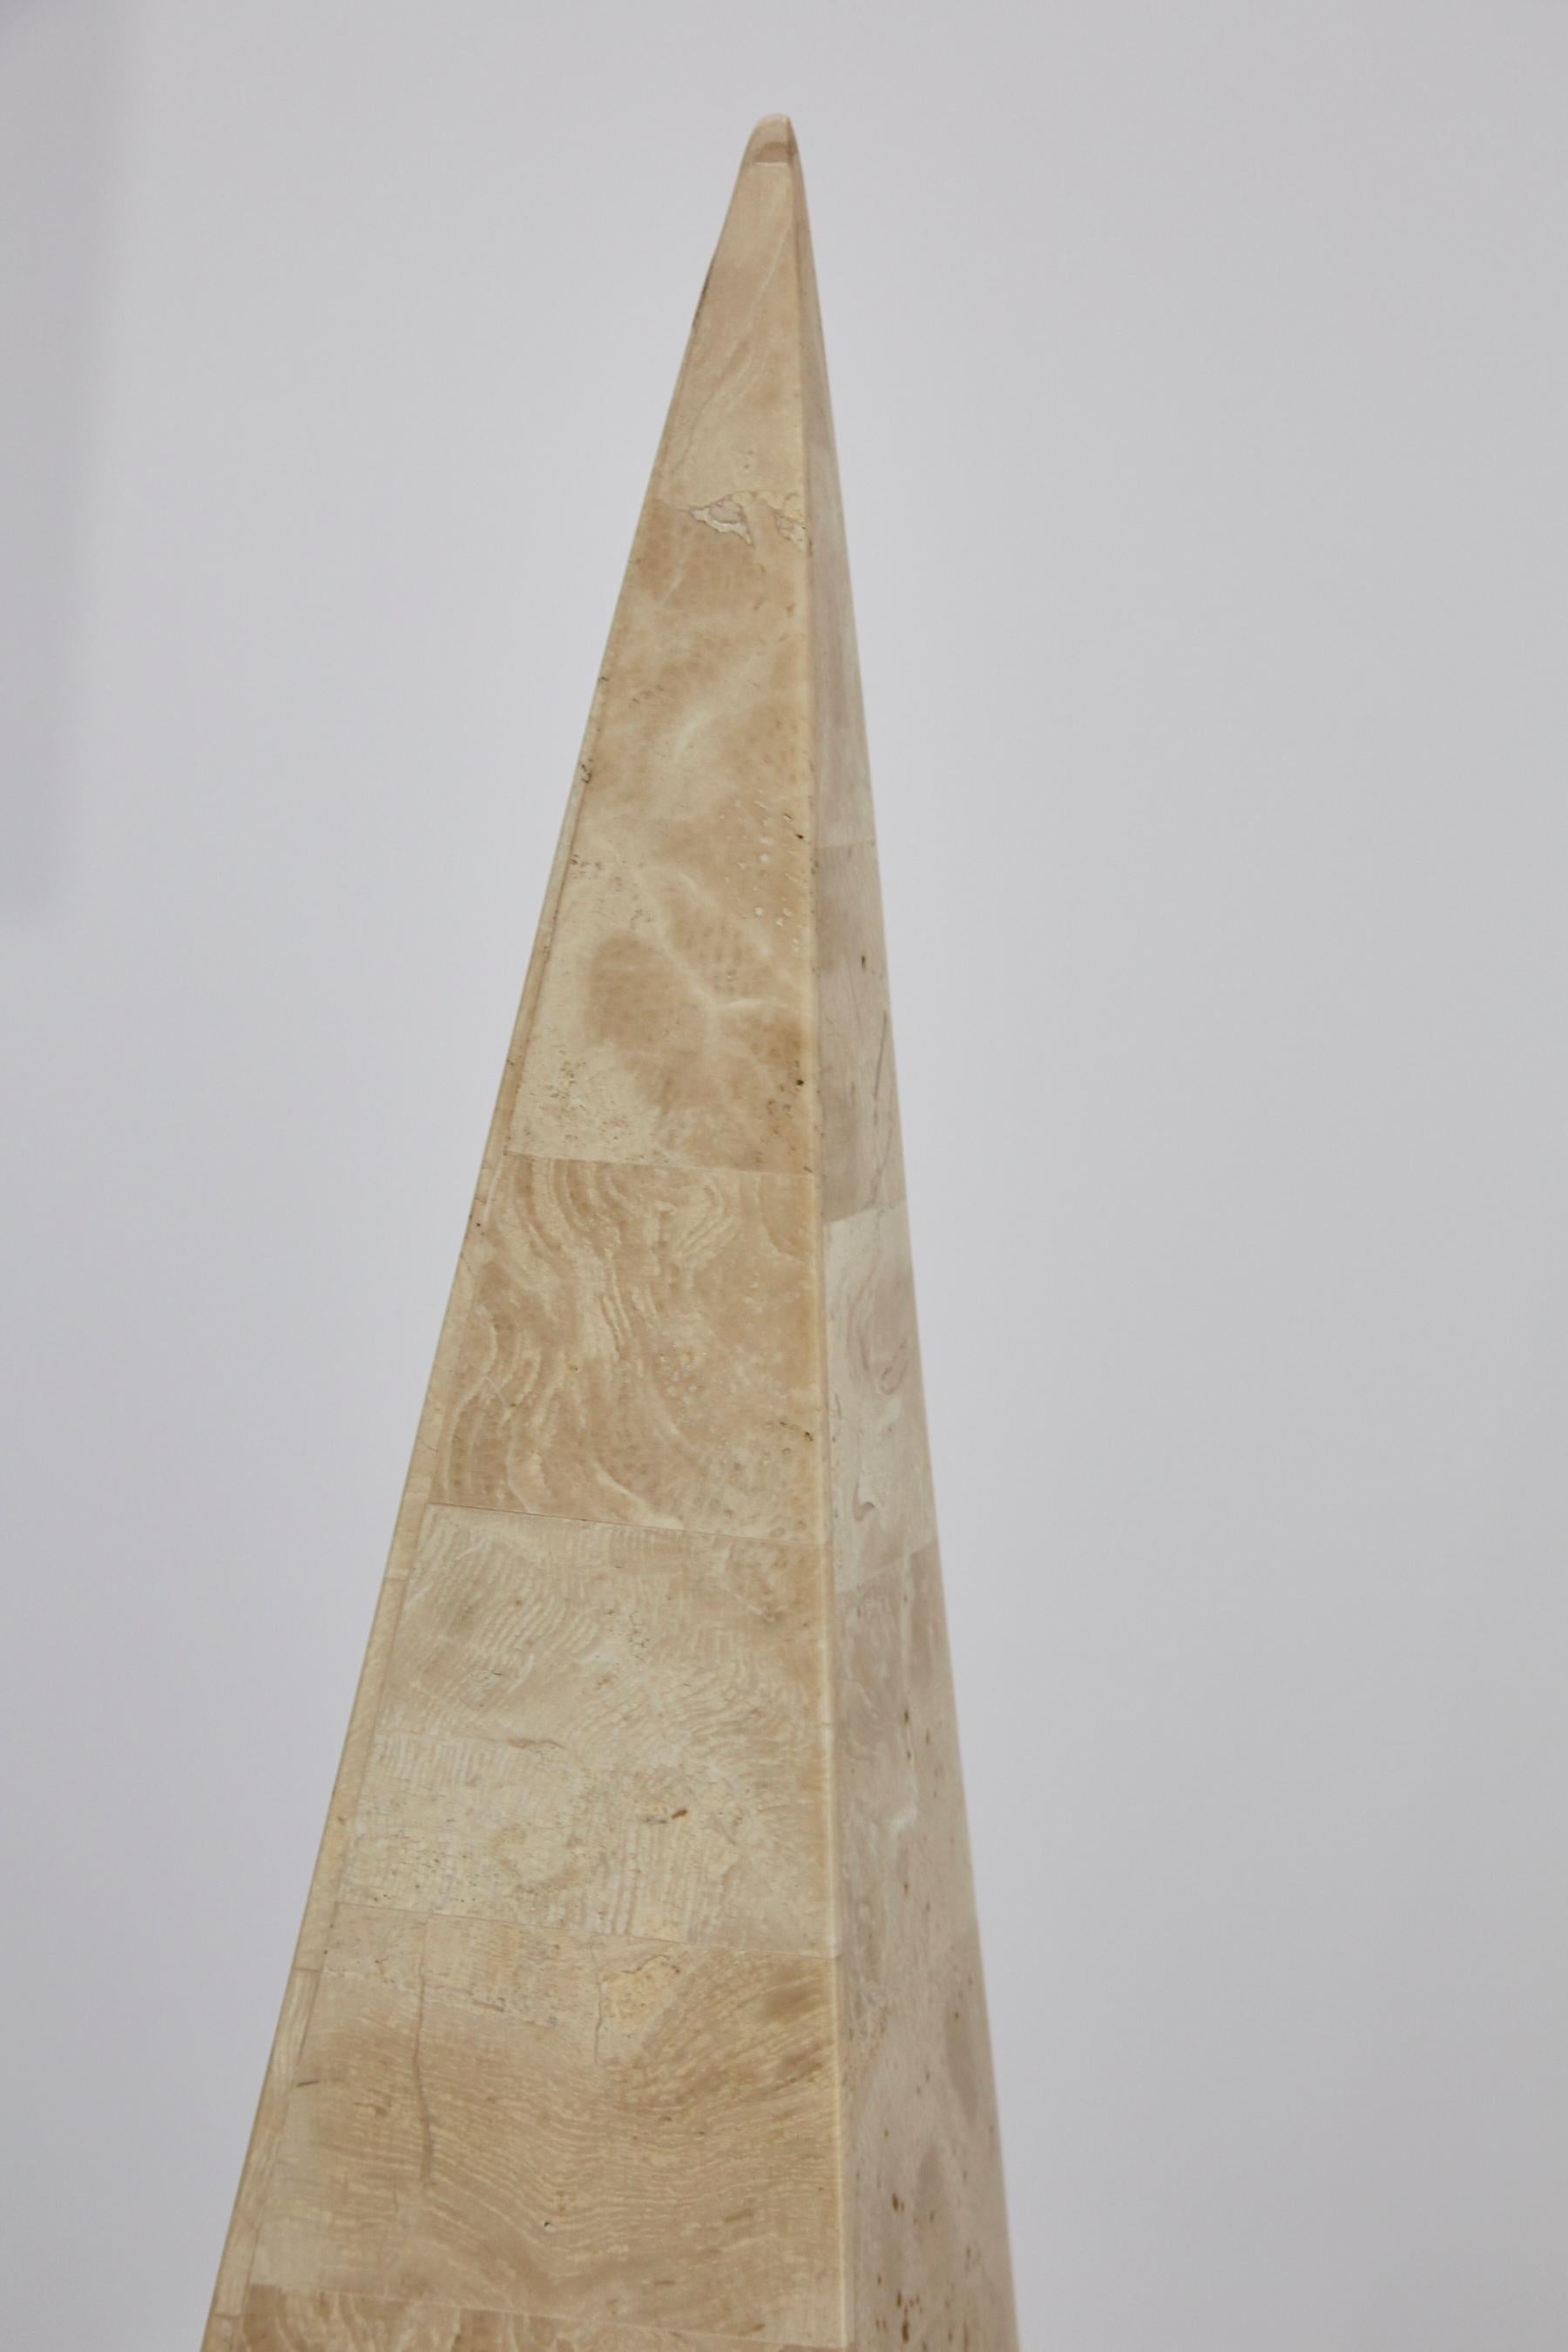 Tall 32 in. Tessellated Stone Obelisk, 1990s For Sale 5